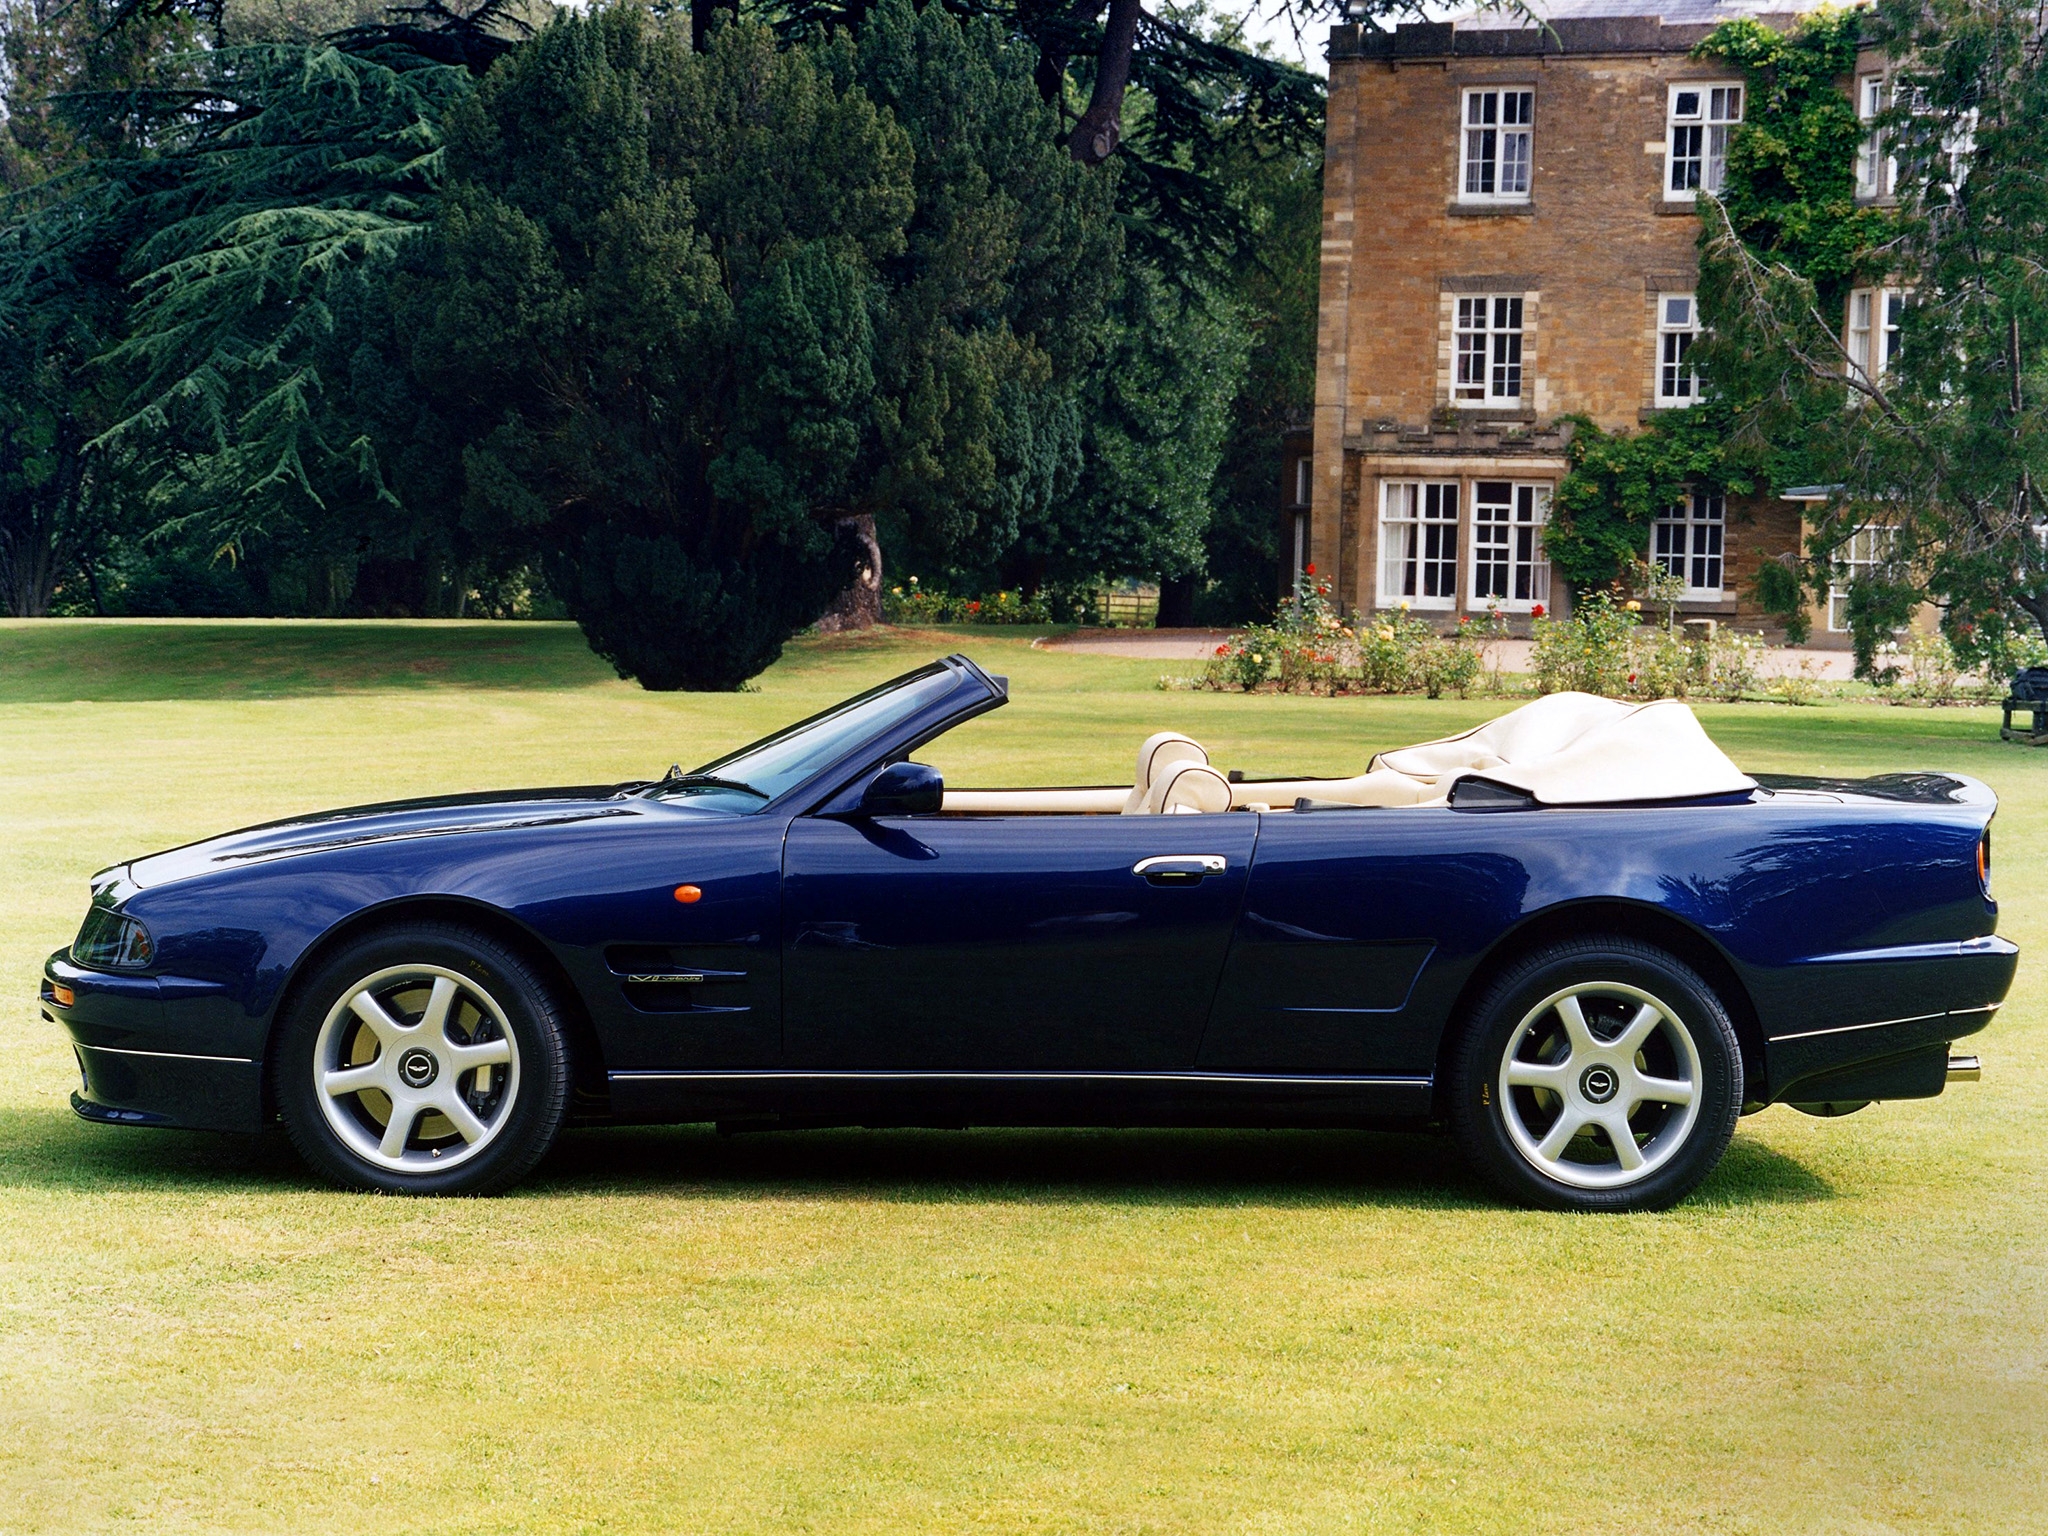 aston martin, cabriolet, 1997, house collection of HD images